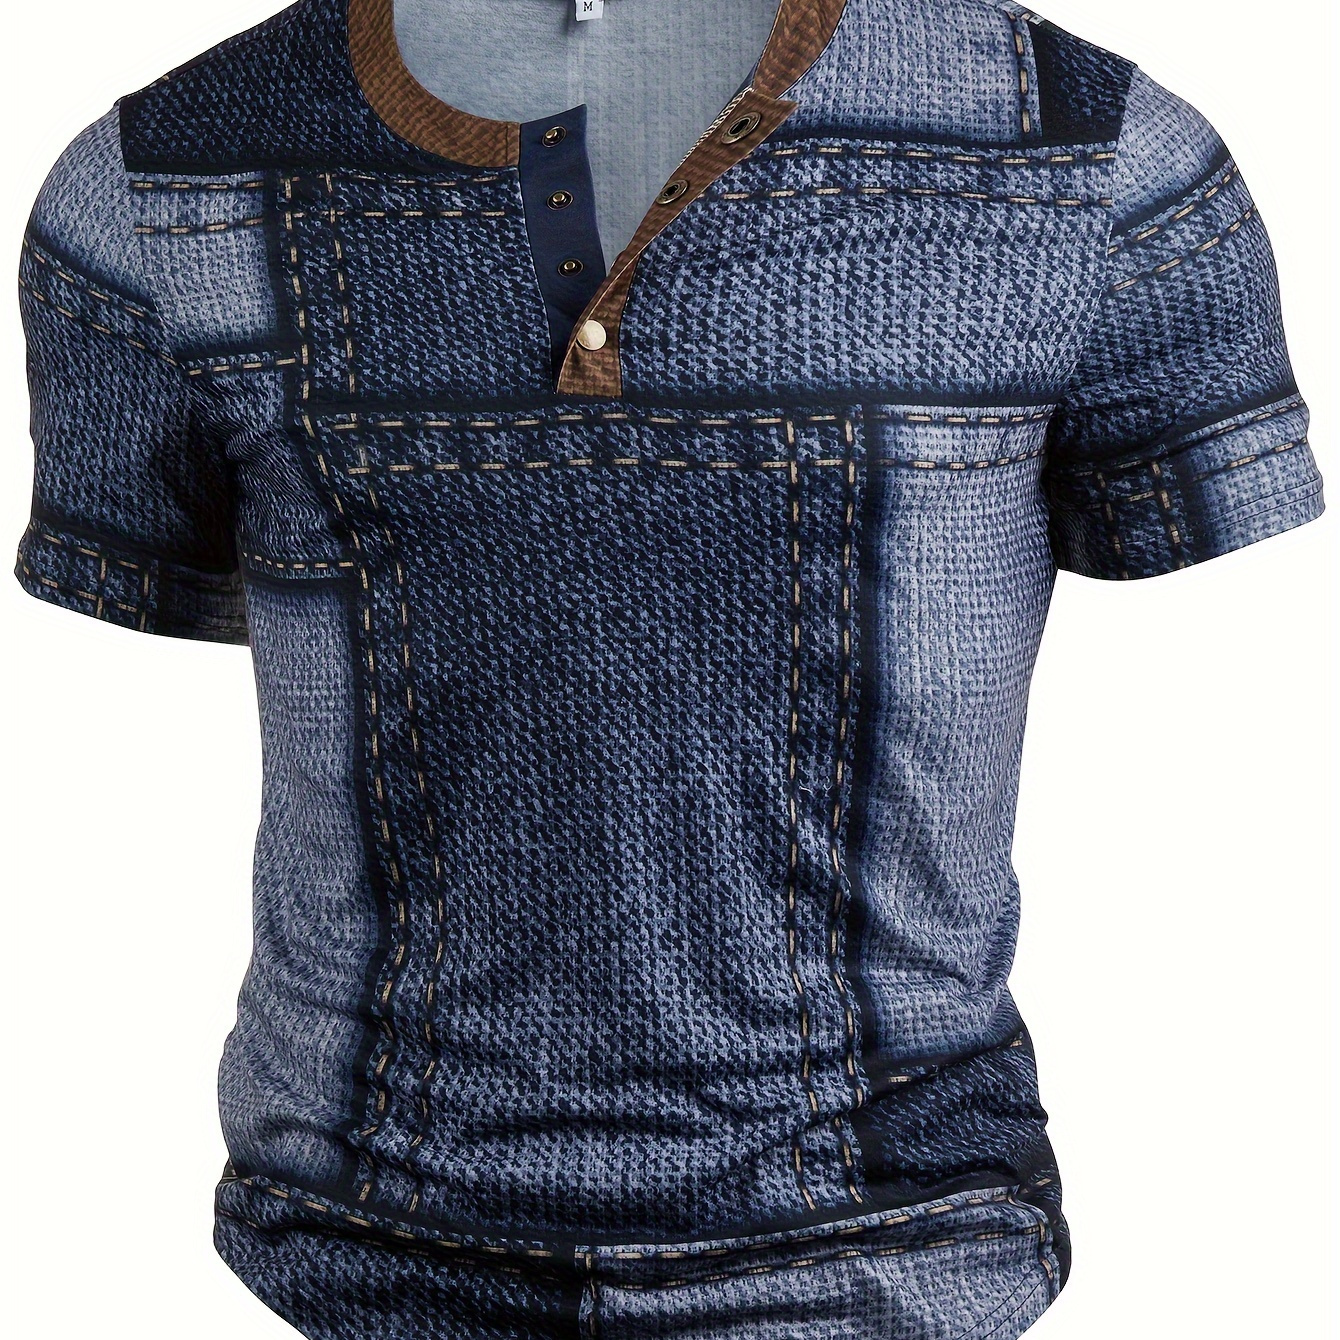 

Men's 3d Digital Denim Patchwork Pieces Pattern Print T-shirt With Buttoned Henley Neck And Short Sleeve, Casual And Chic Tops For Summer Outdoors Wear